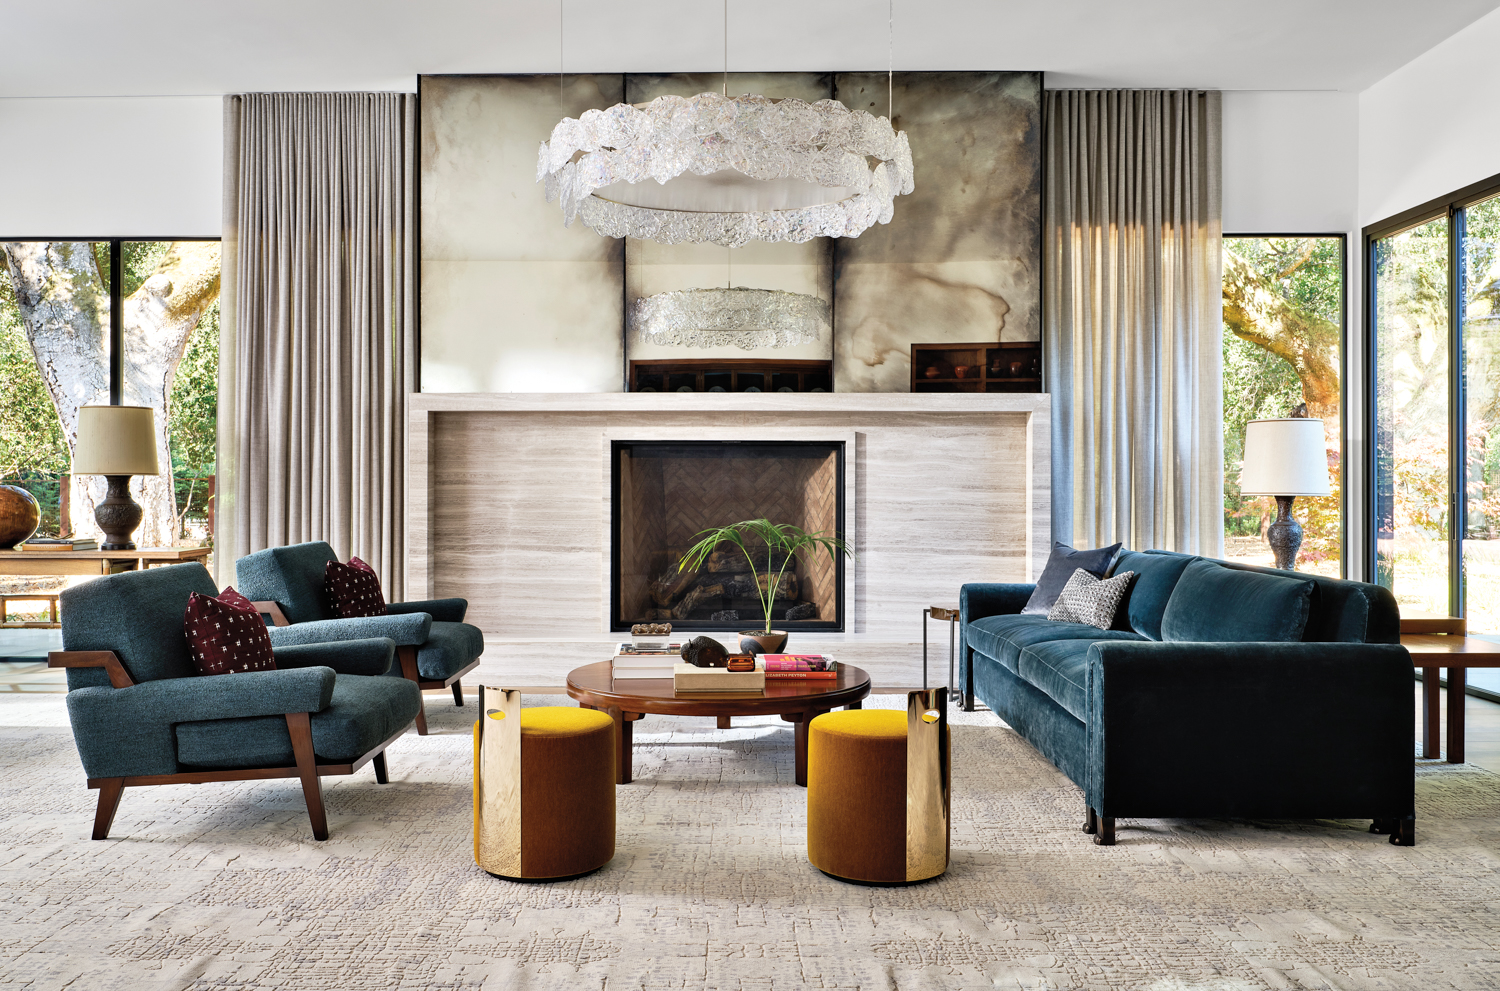 The interiors of this midcentury...